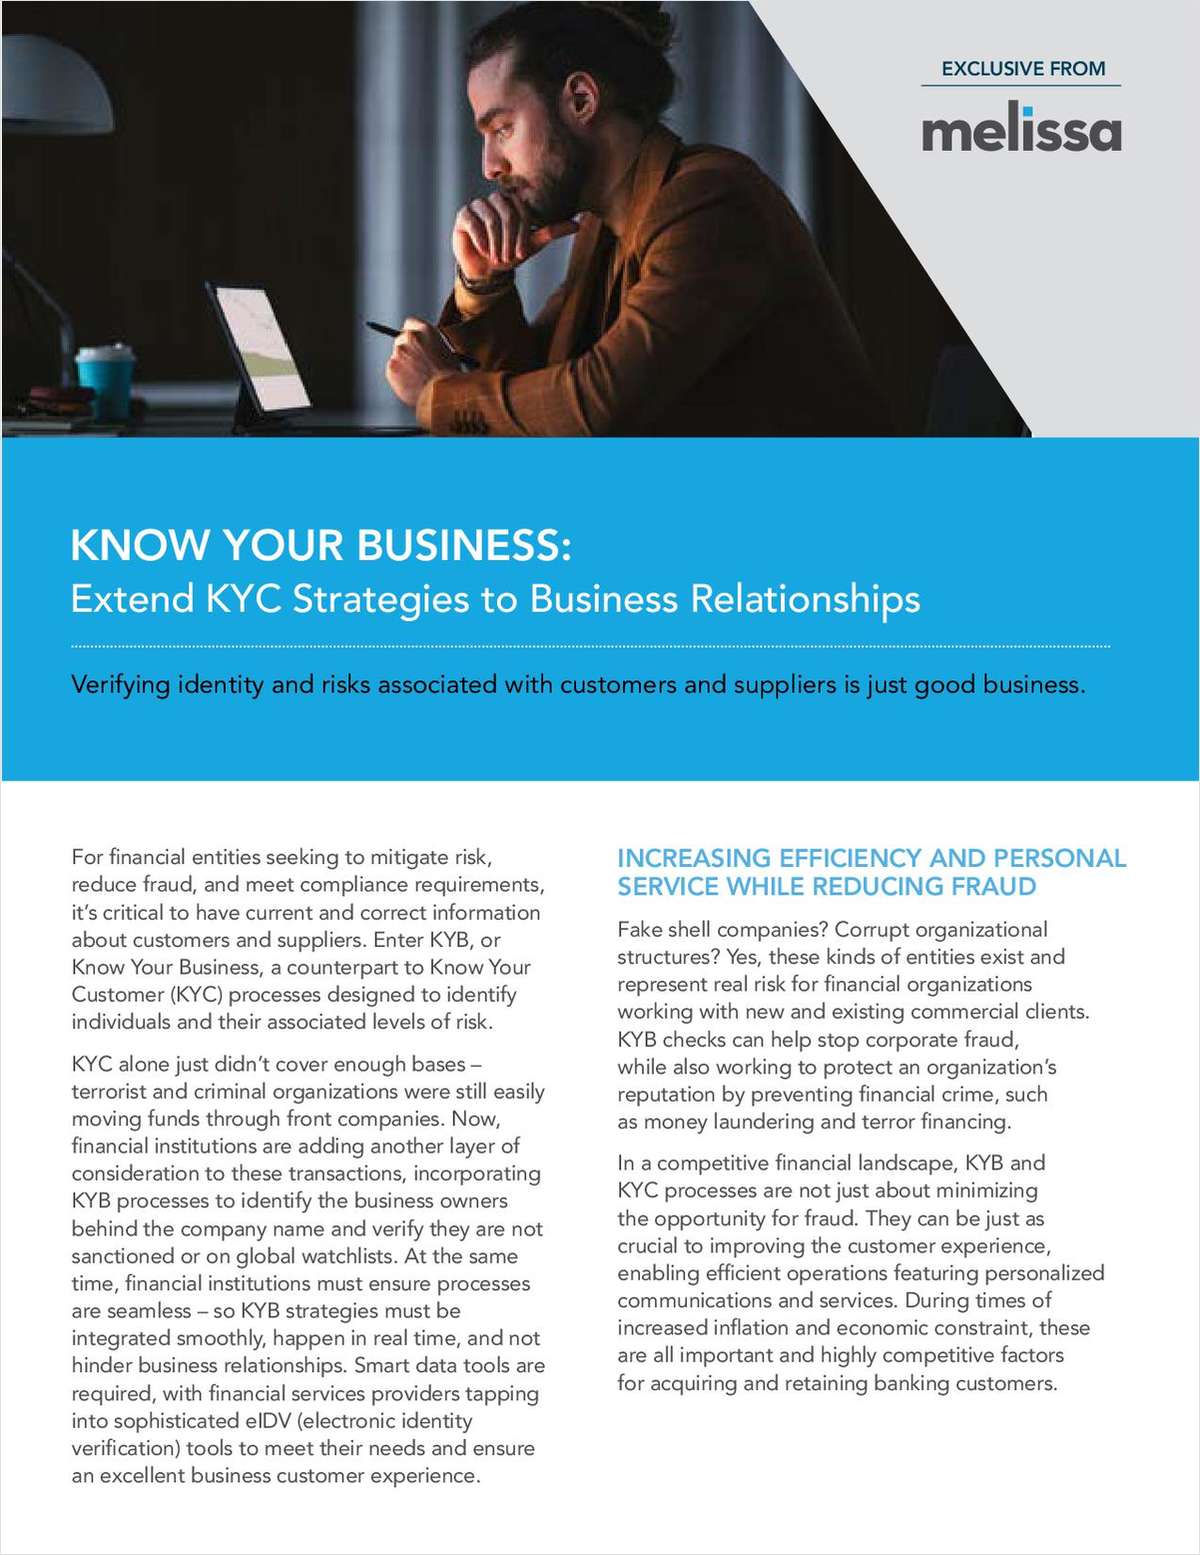 Know Your Business: Extend KYC Strategies to Business Relationships link